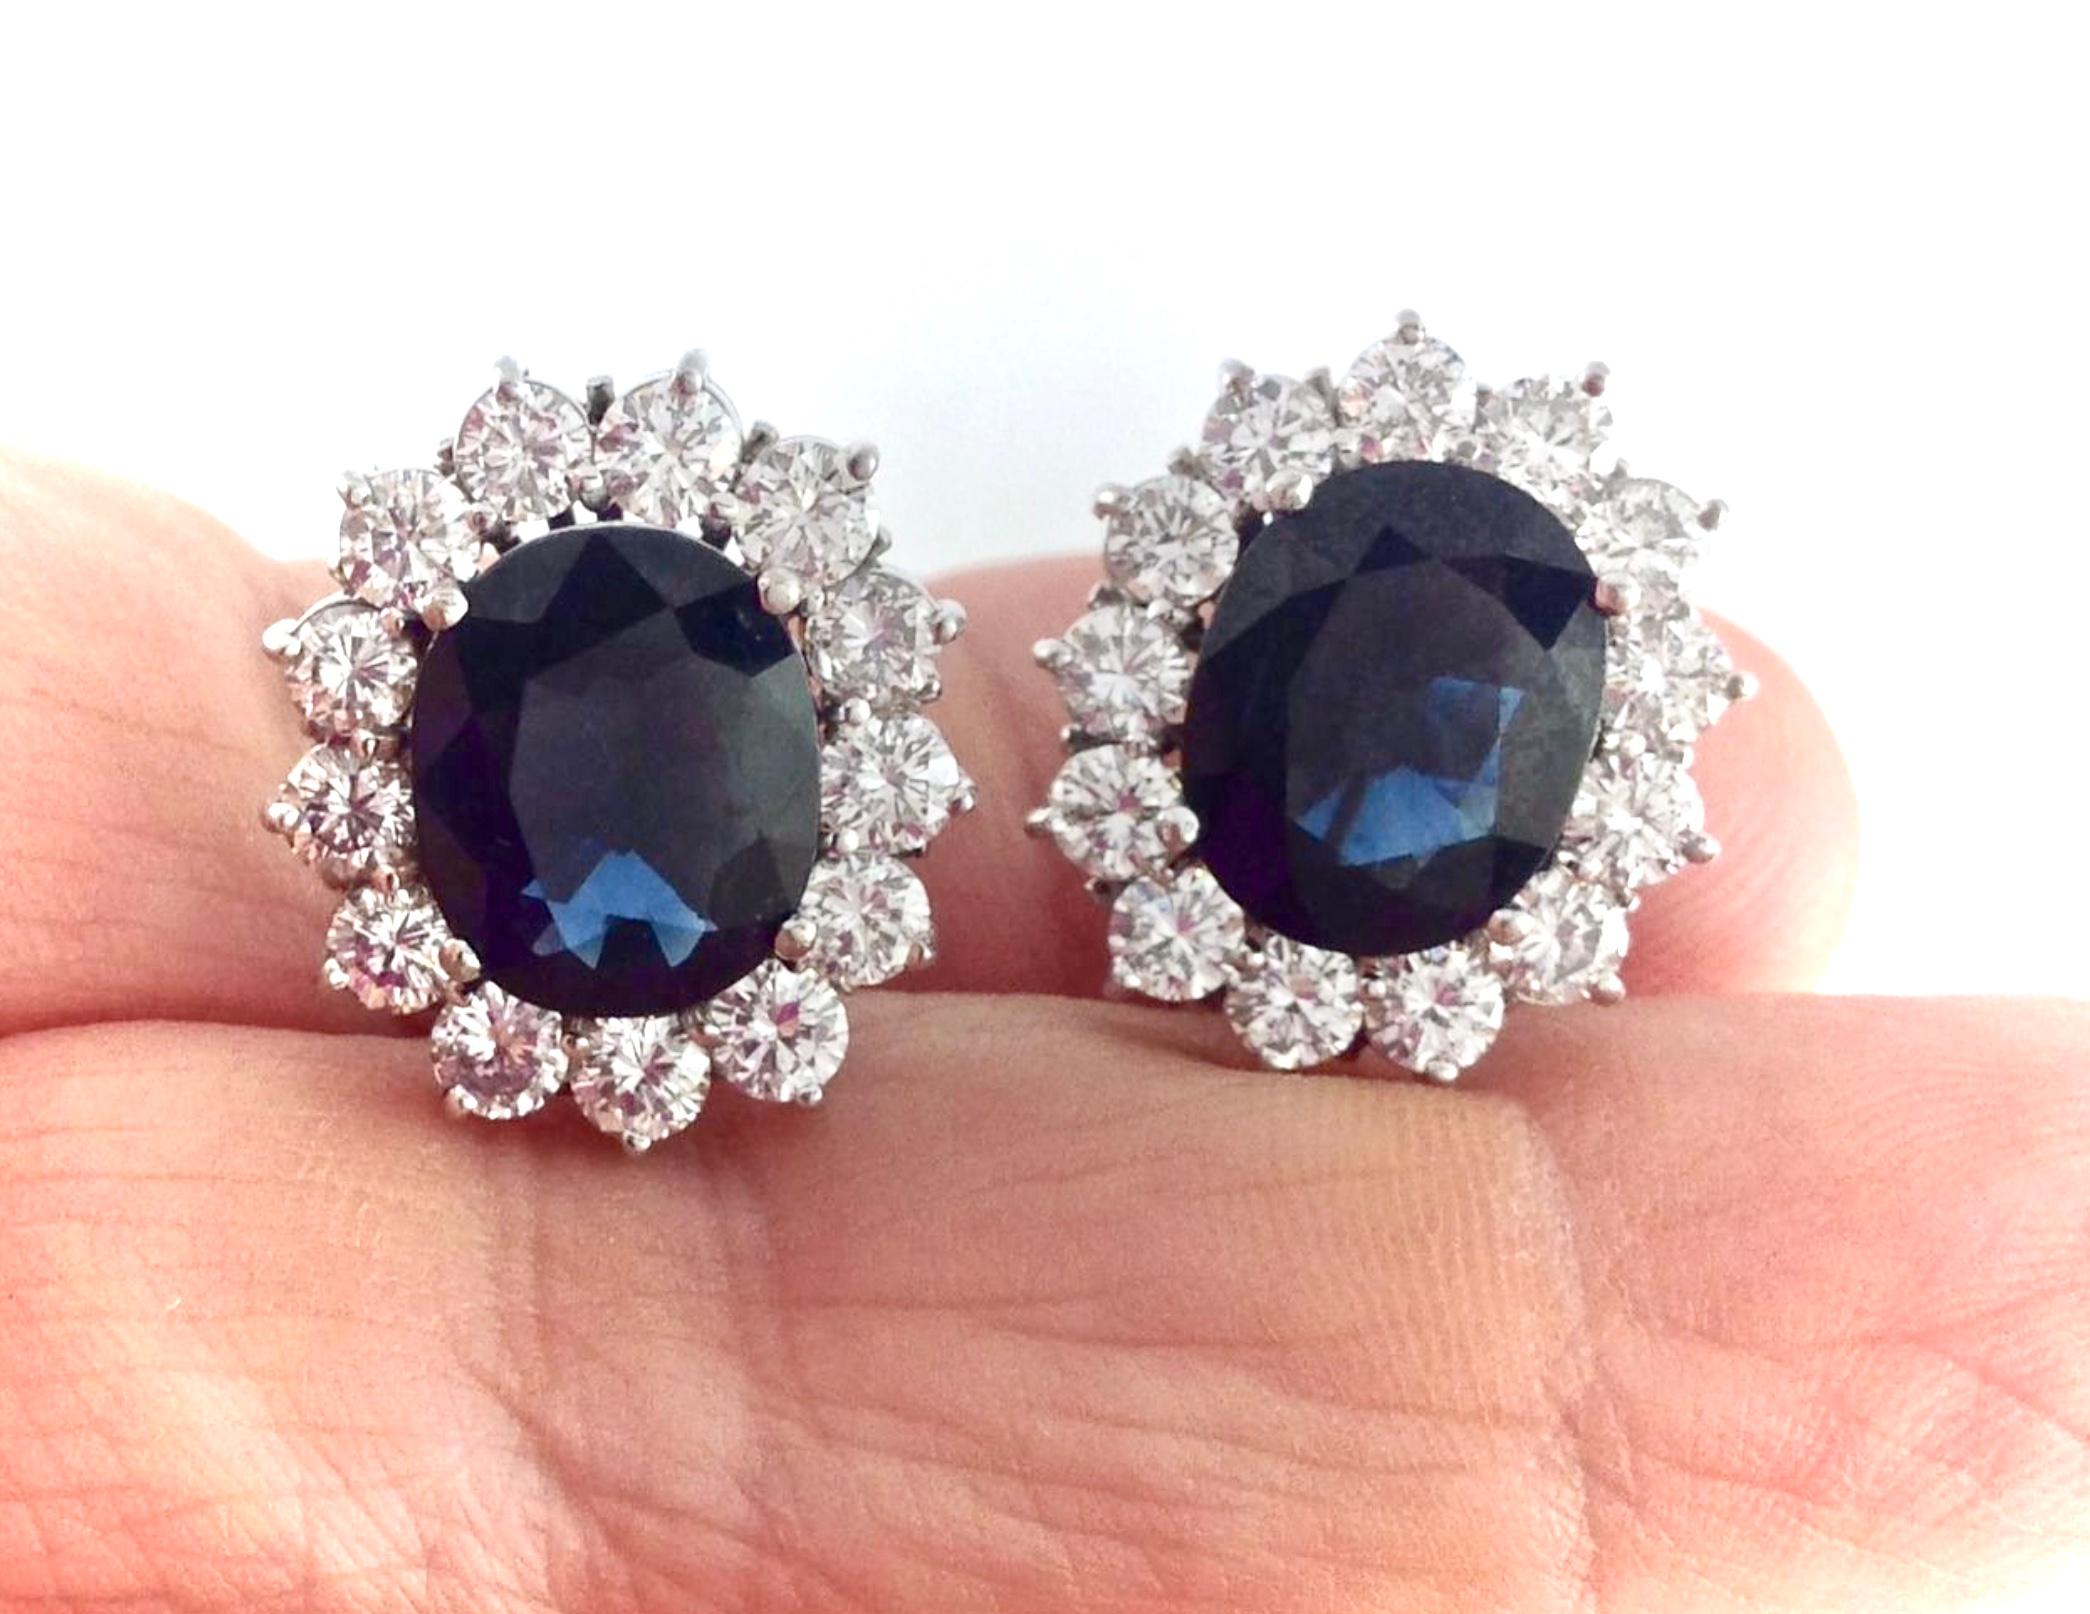 Timeless Natural Blue Sapphire & Diamond Estate Clip-on Earrings 18K White Gold
These gorgeous estate earrings are centered with two natural oval cut deep blue sapphires, VS clarity, weighing approx. 10.00 carats, surrounded by 4.00 carats diamond